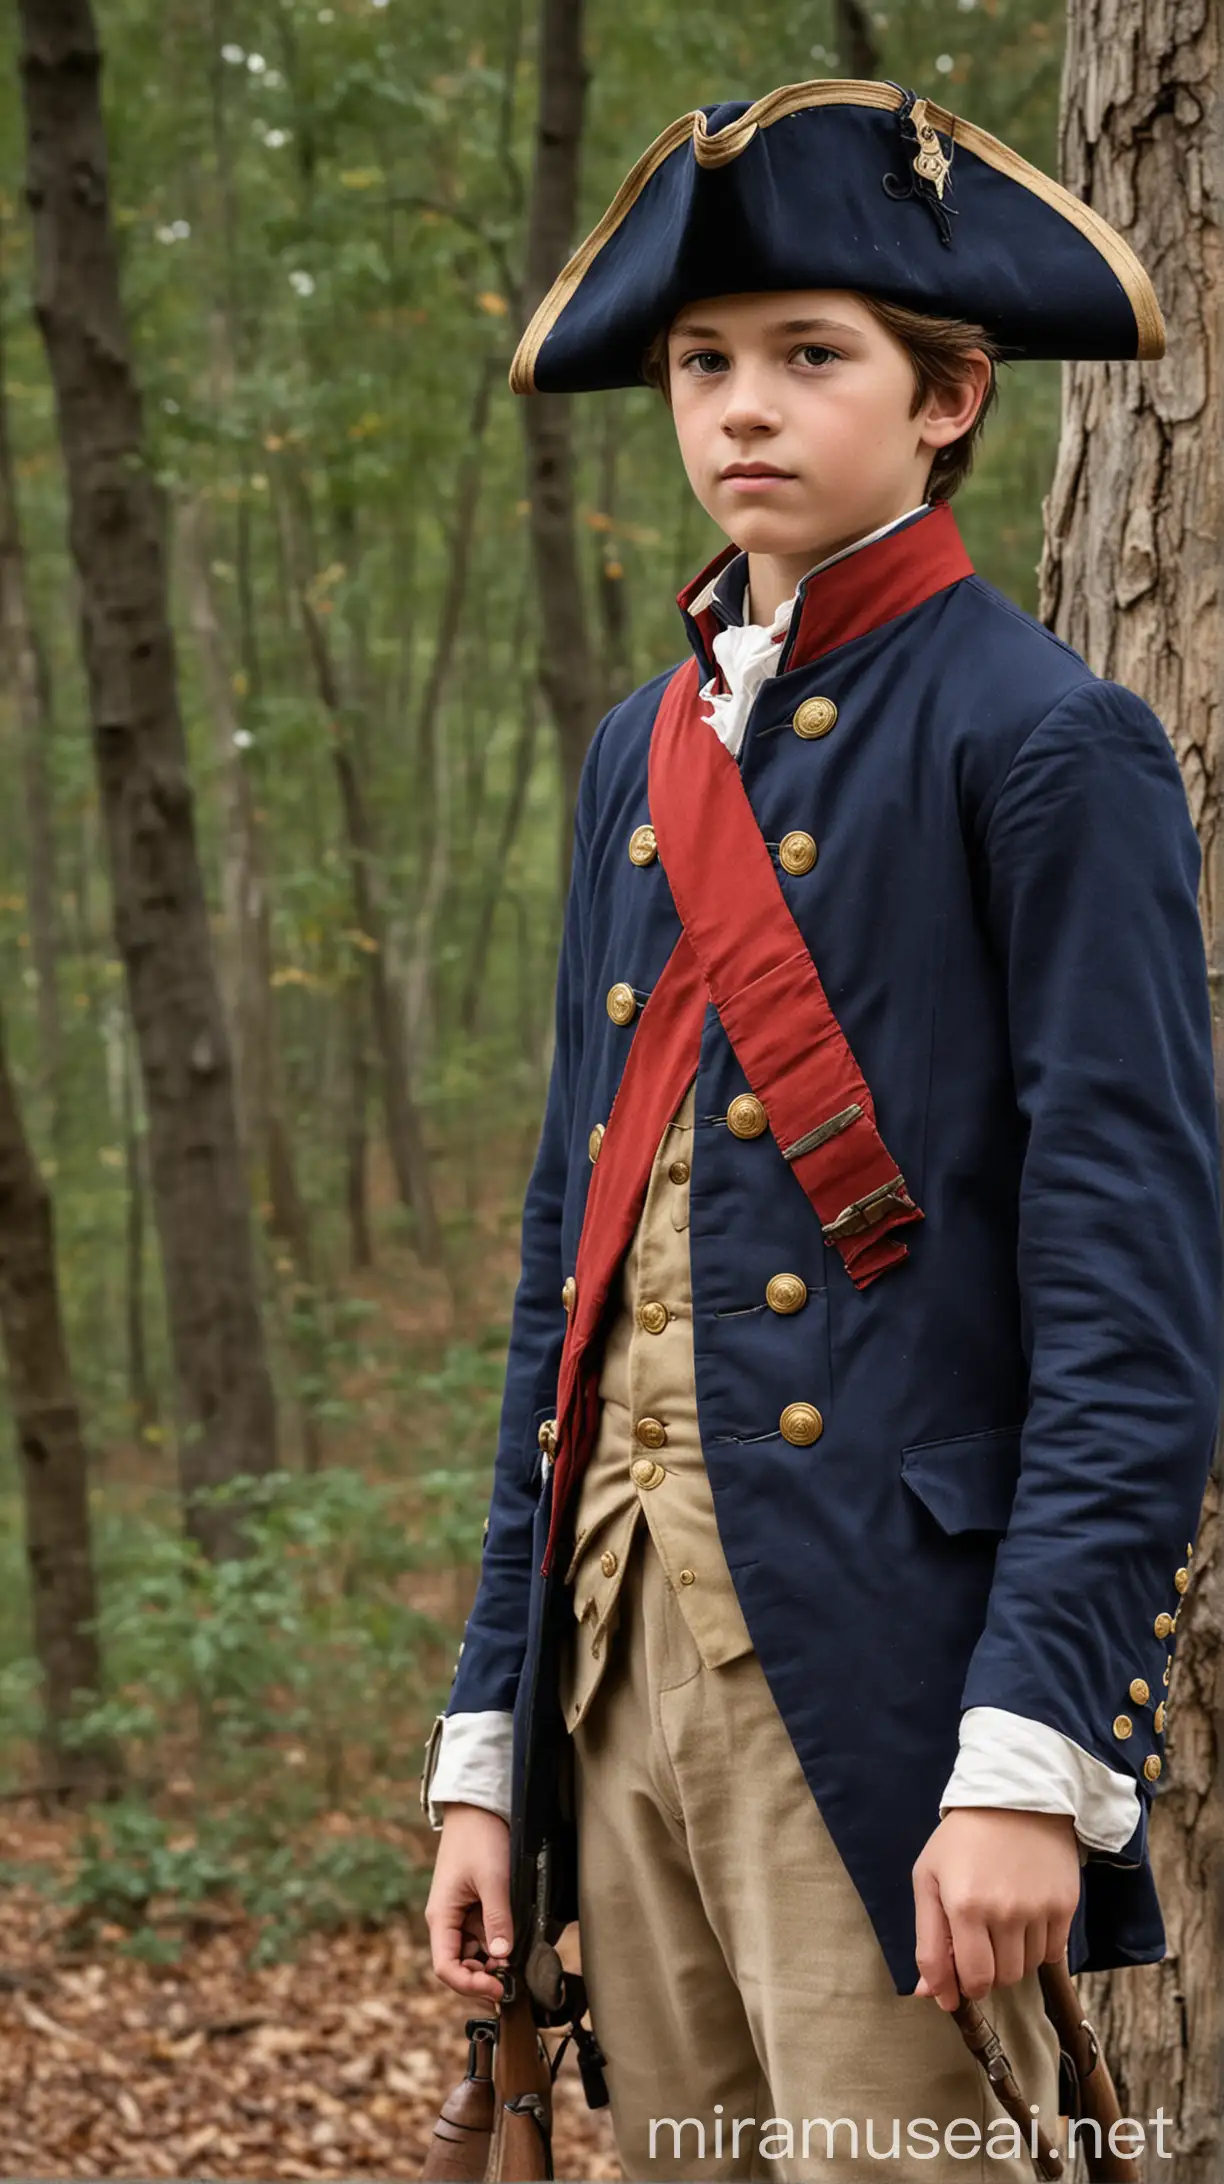 13YearOld Jackson as Continental Army Messenger in Hyper Realistic Style